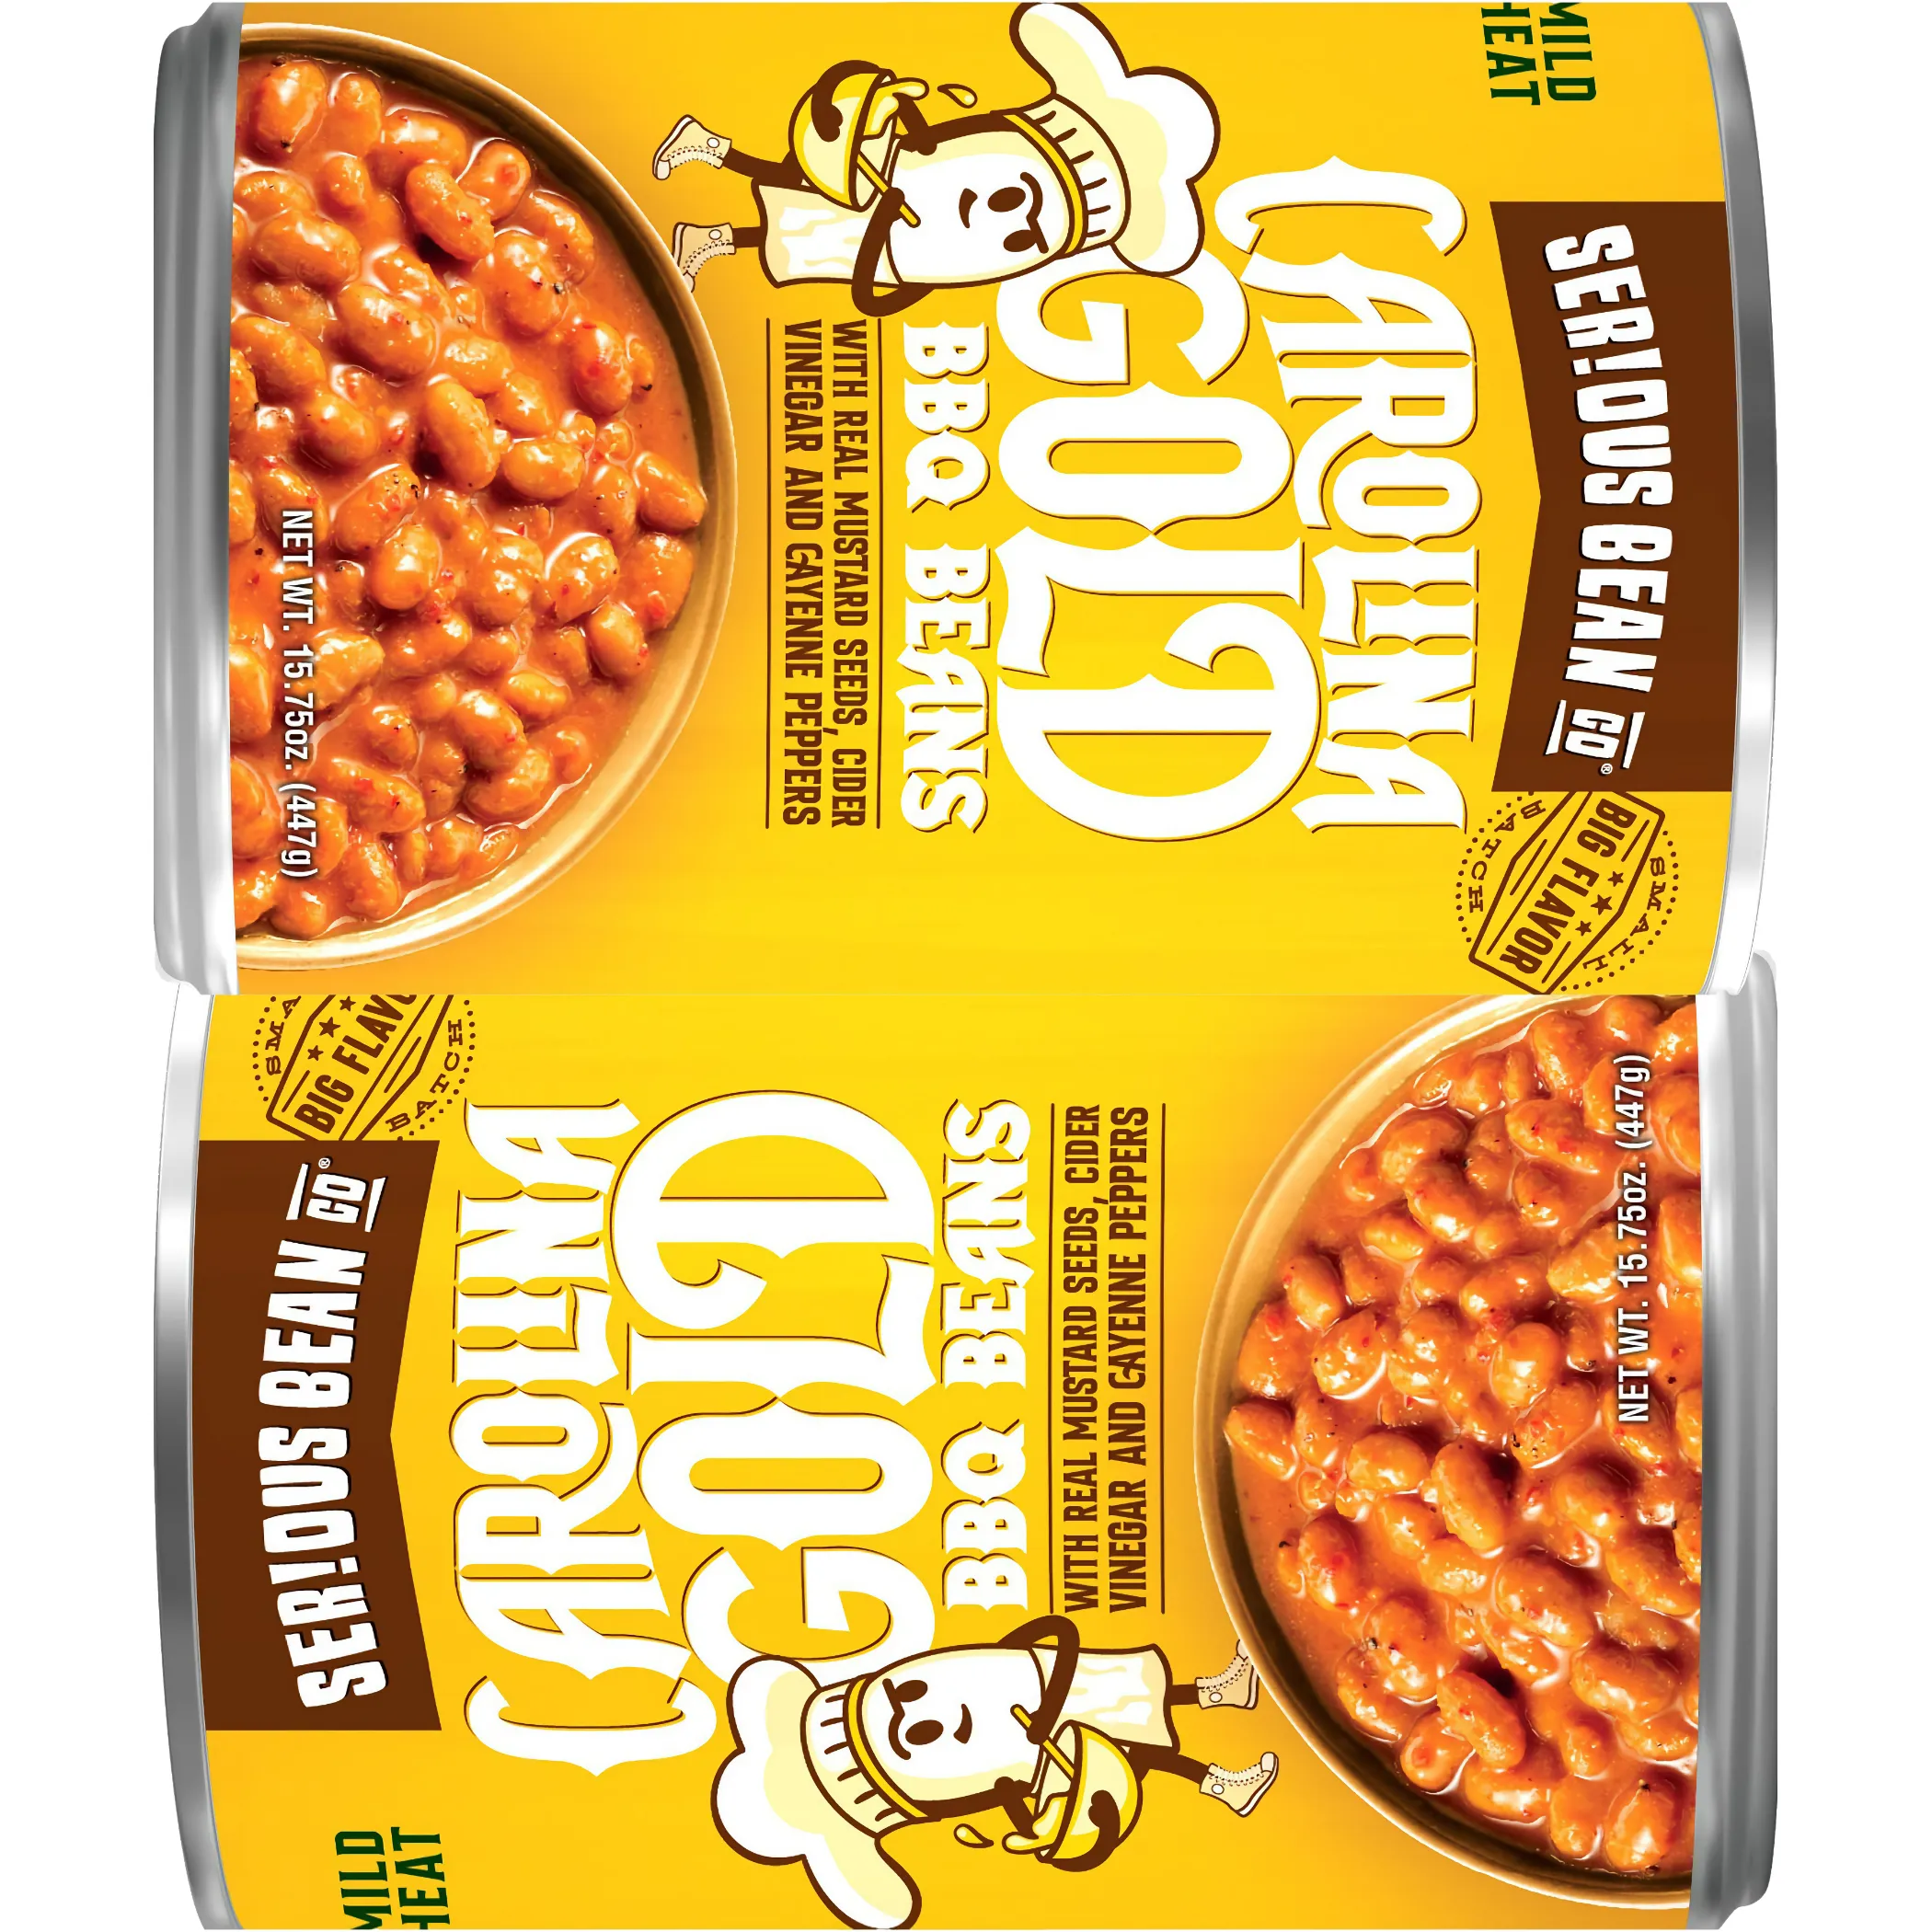 Free Coupon For A Can Of Serious Bean Co. Beans